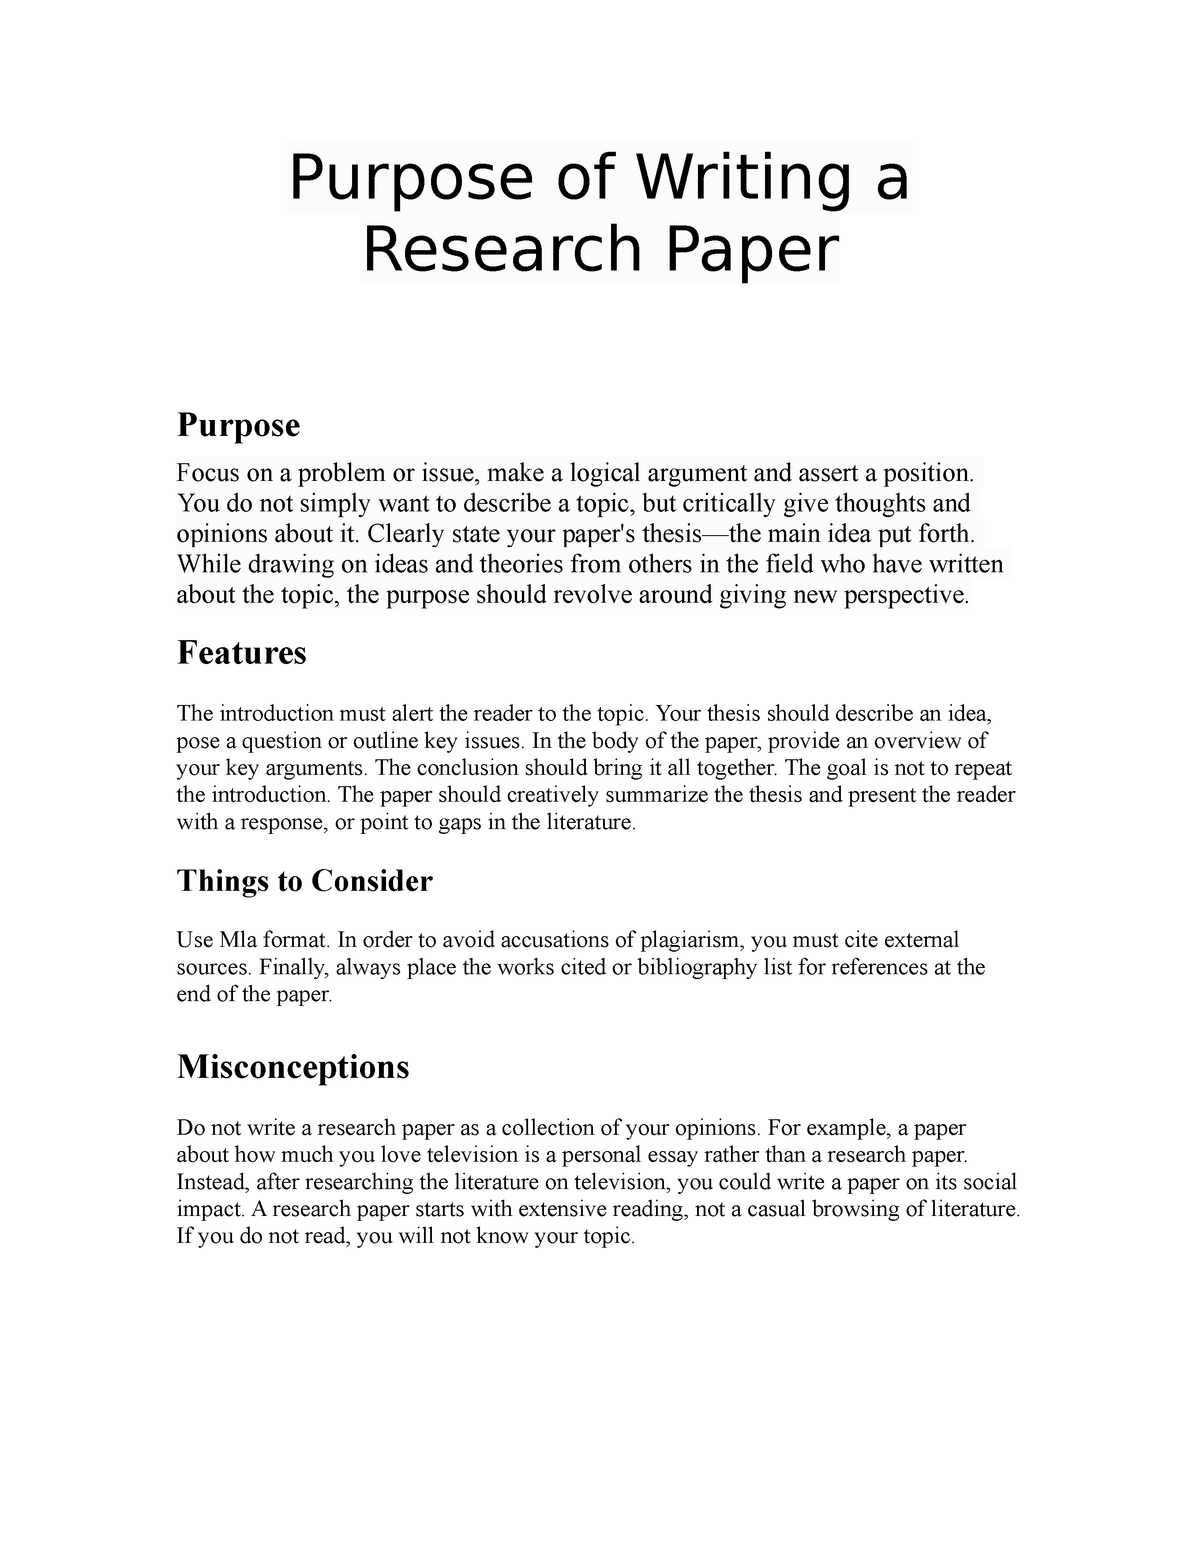 purpose of a research paper example